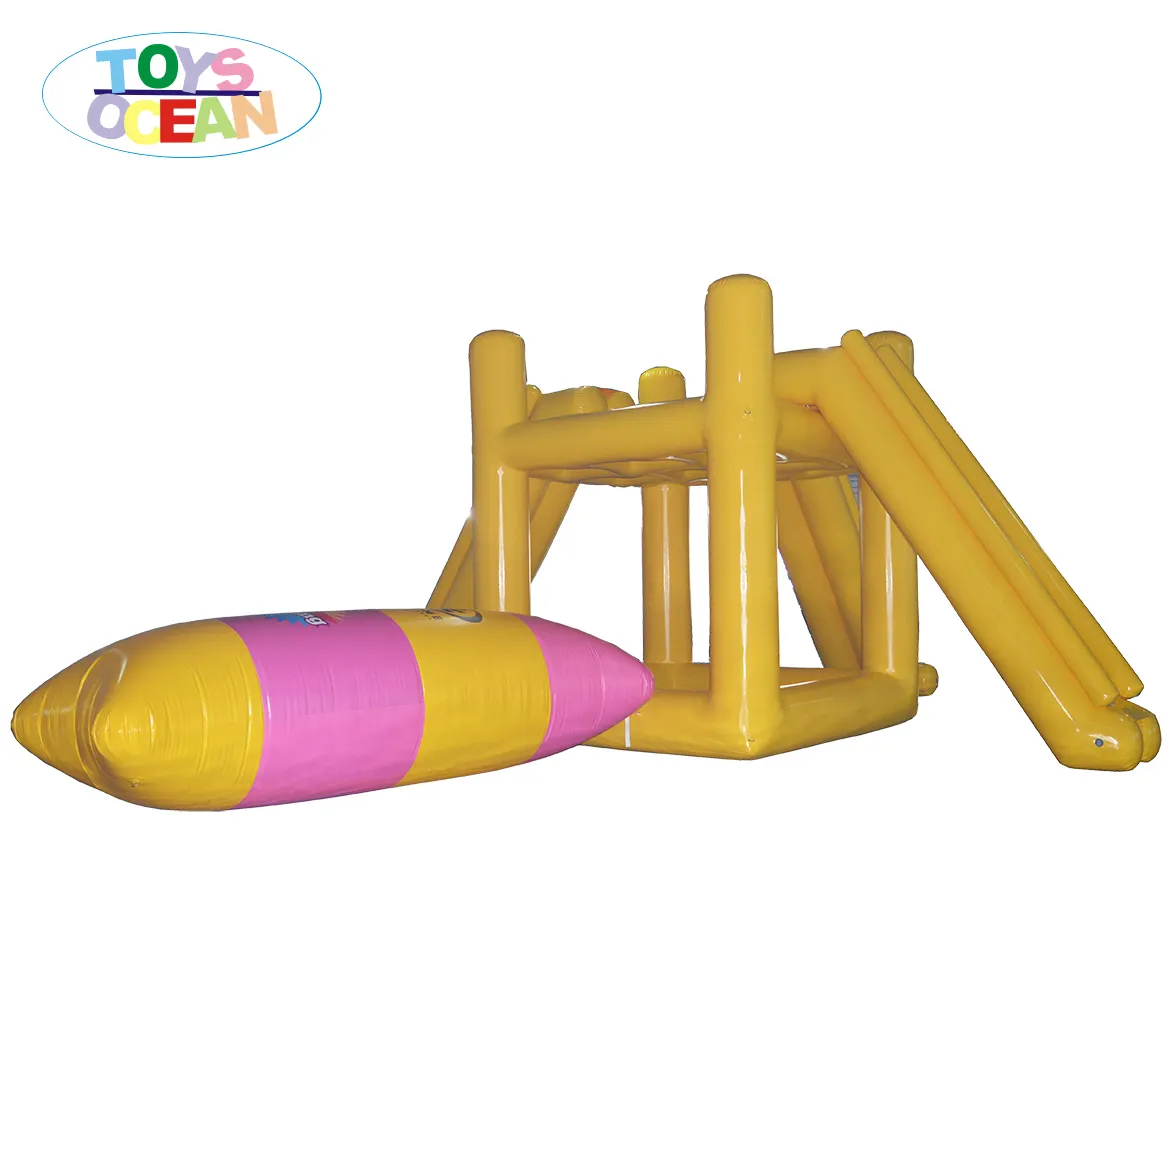 New floating inflatable slide tower for water catapult blob for lake toys